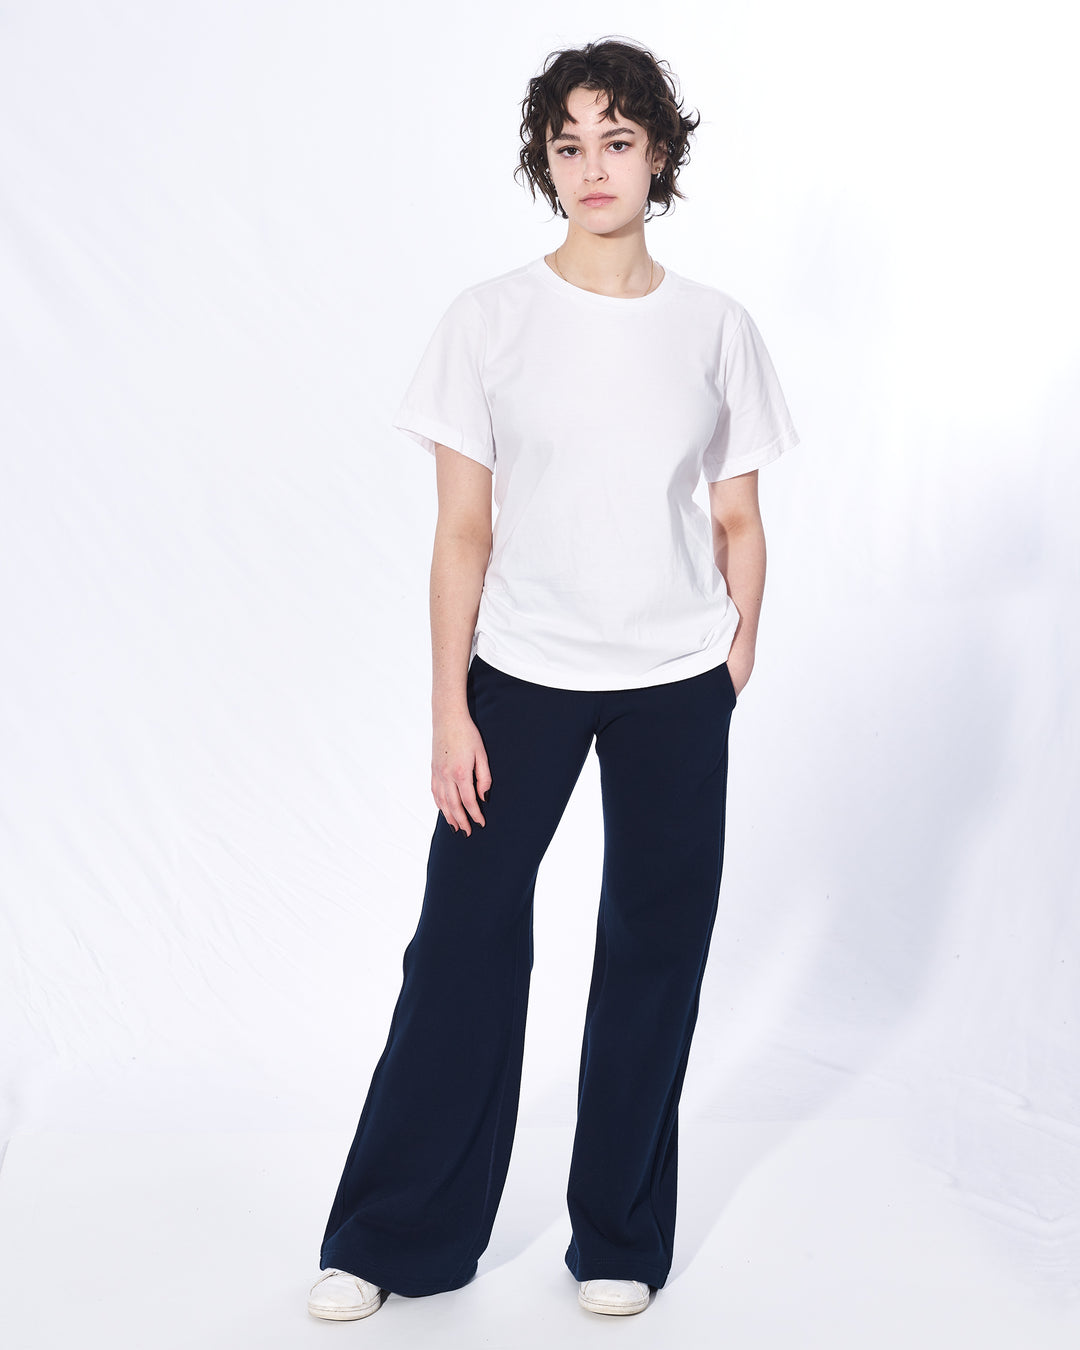 Wide Leg Pant - Made in Canada - 100% Cotton – FRÈRE DU NORD